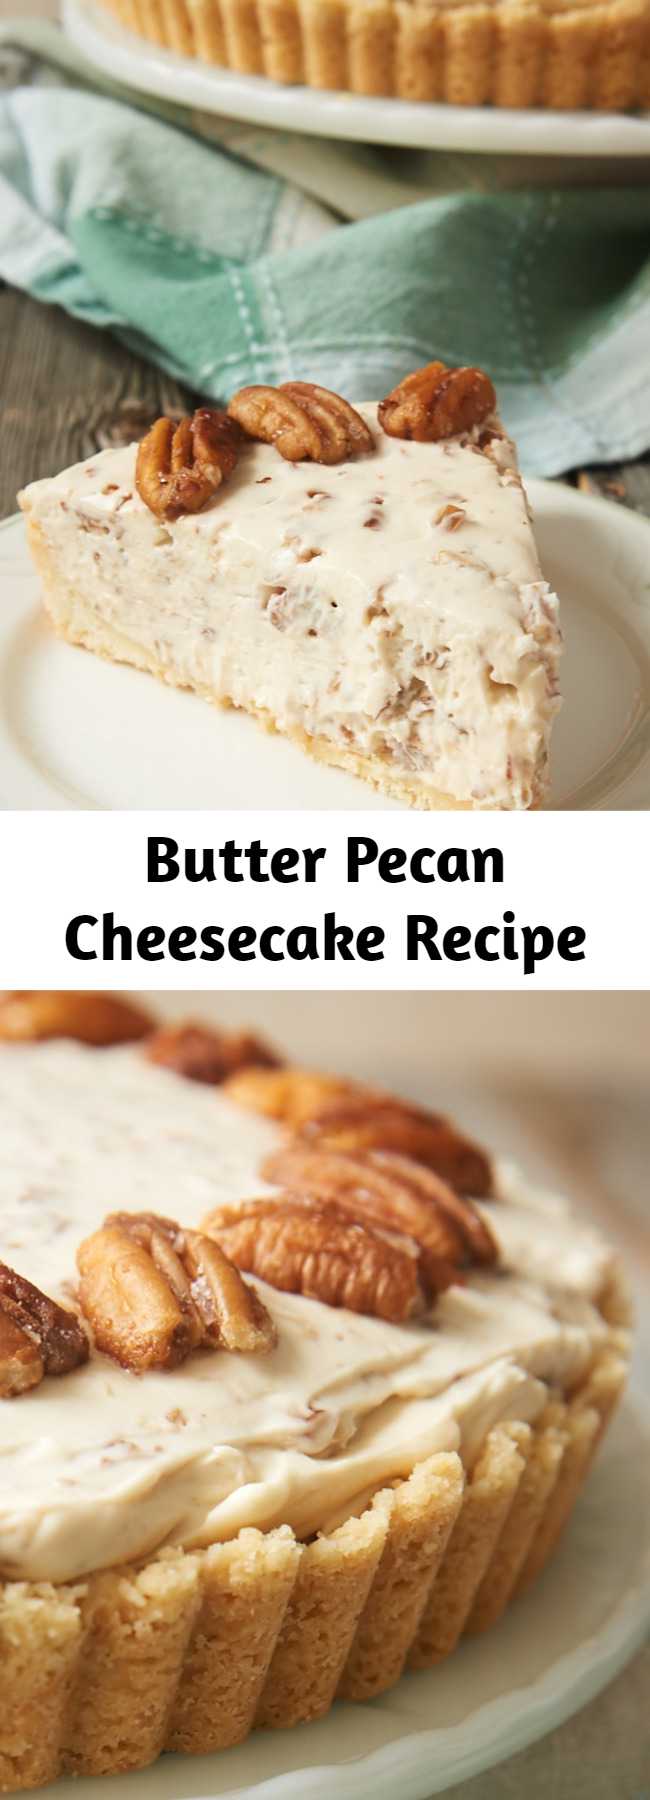 Butter Pecan Cheesecake Recipe - Buttery toasted pecans add big flavor to this Butter Pecan Cheesecake!